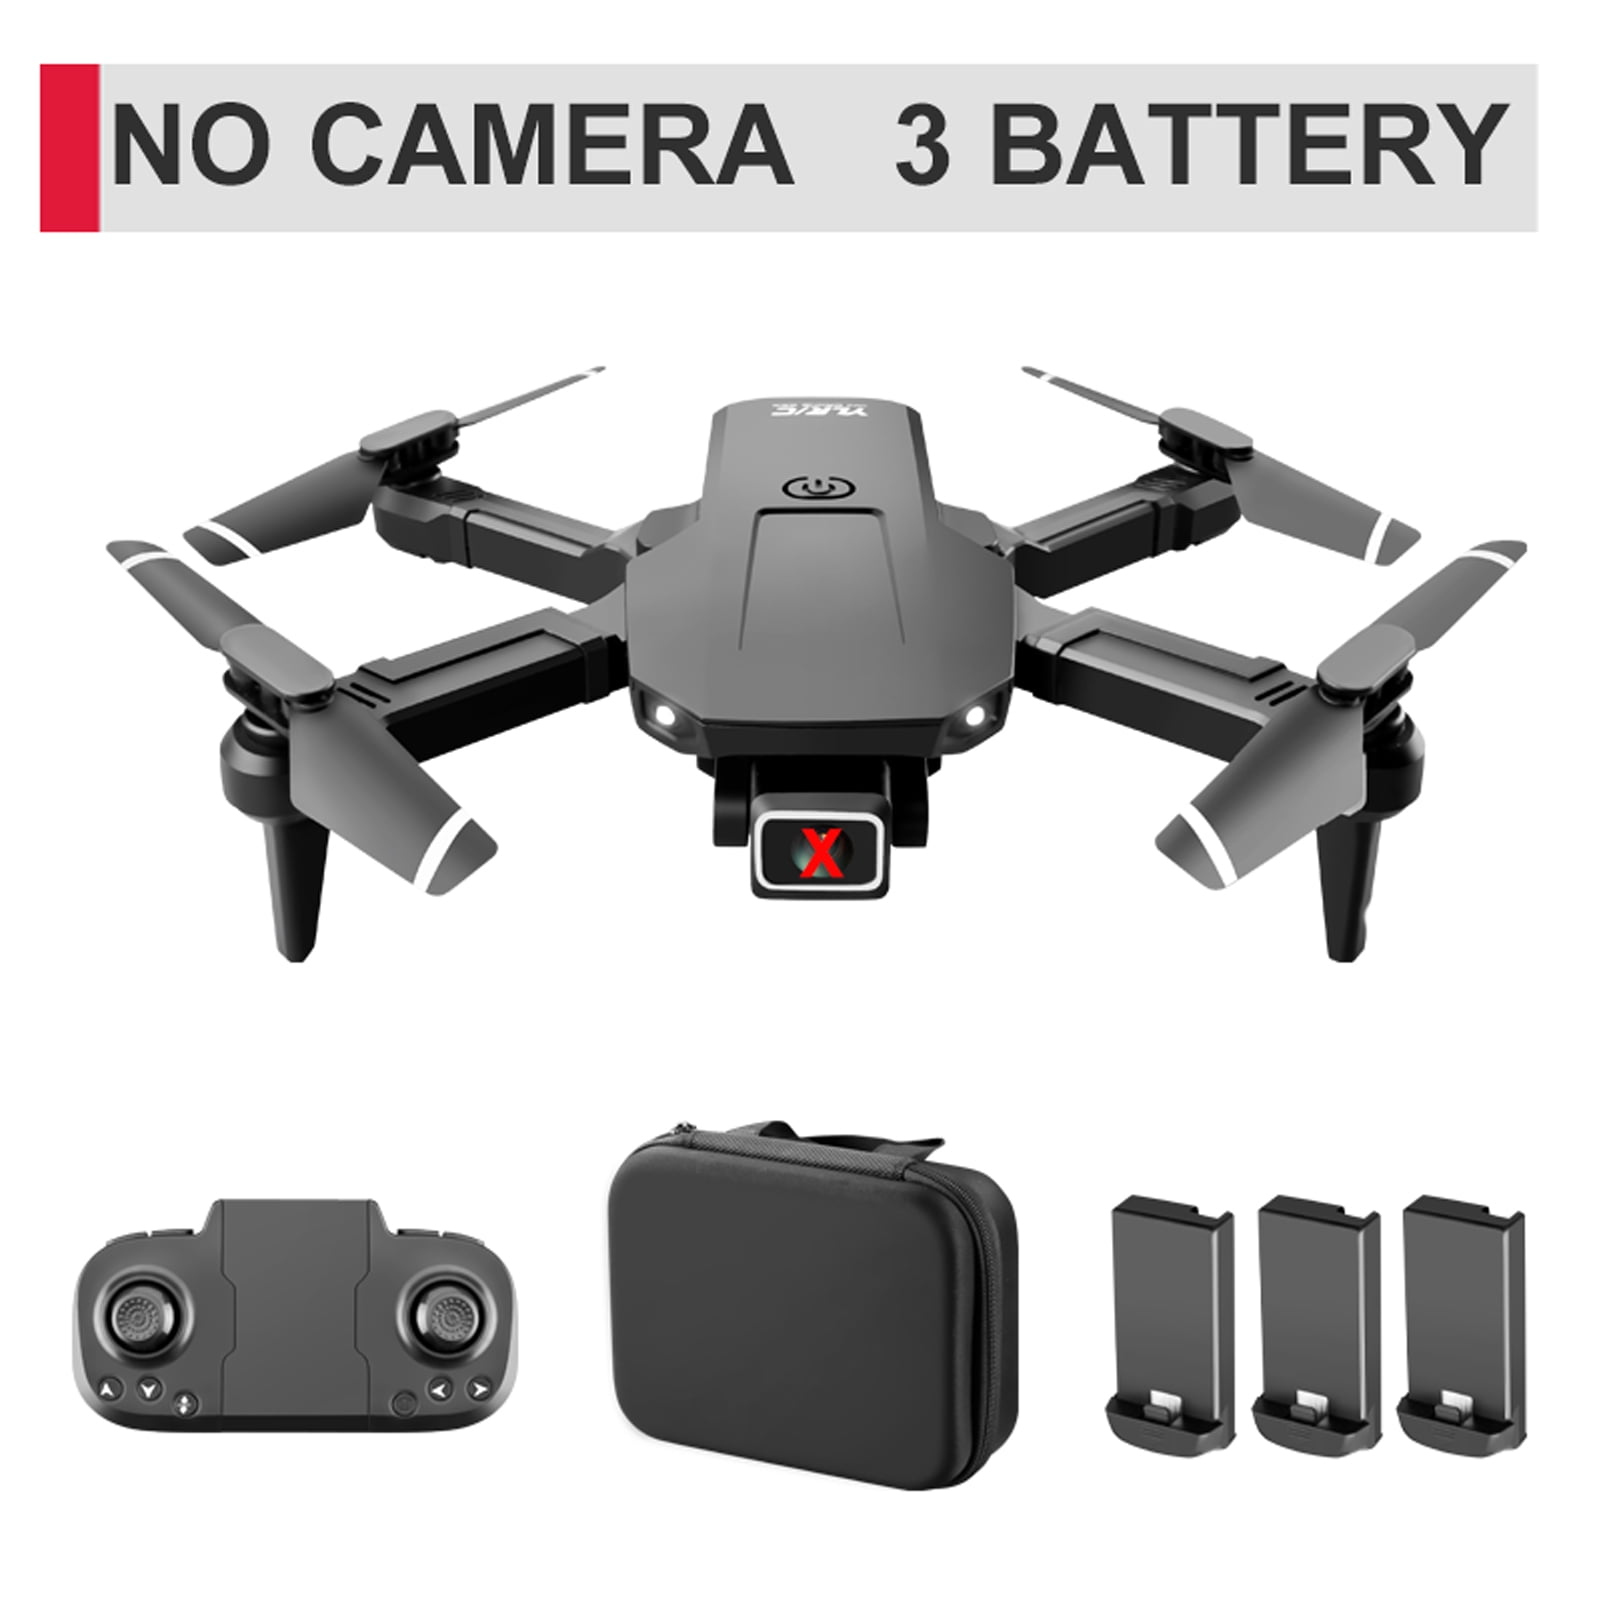 S68 Mini RC Drone with Camera 4K,Wifi FPV Quadcopter Toy for Kids with Gravity Sensor Control,Headless Mode,Gesture Photo/Video -